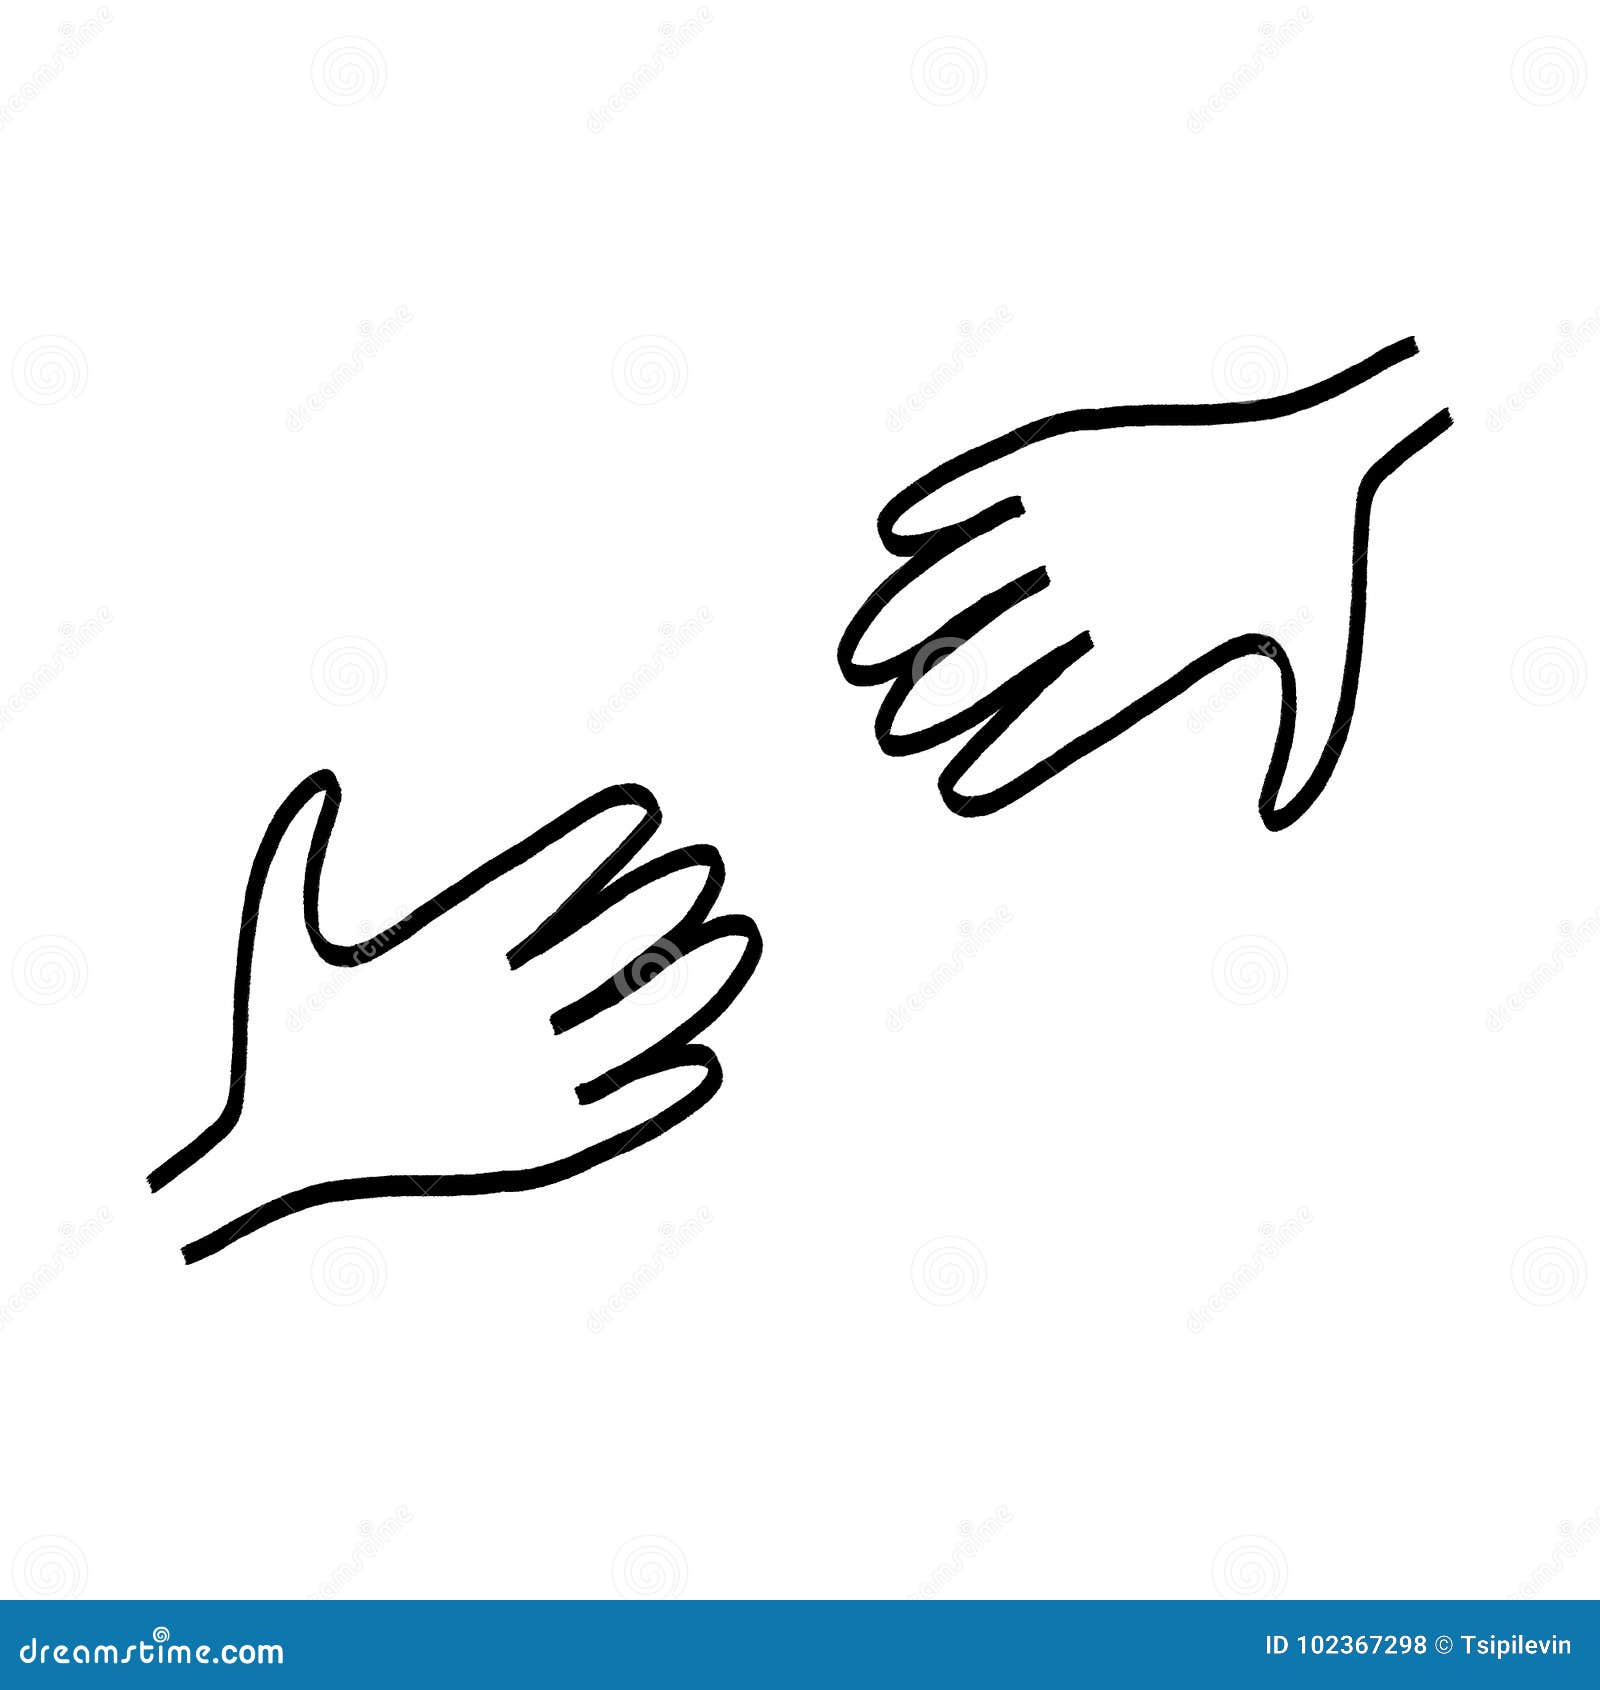 Outline Hands Reaching Stock Illustrations 193 Outline Hands Reaching Stock Illustrations Vectors Clipart Dreamstime